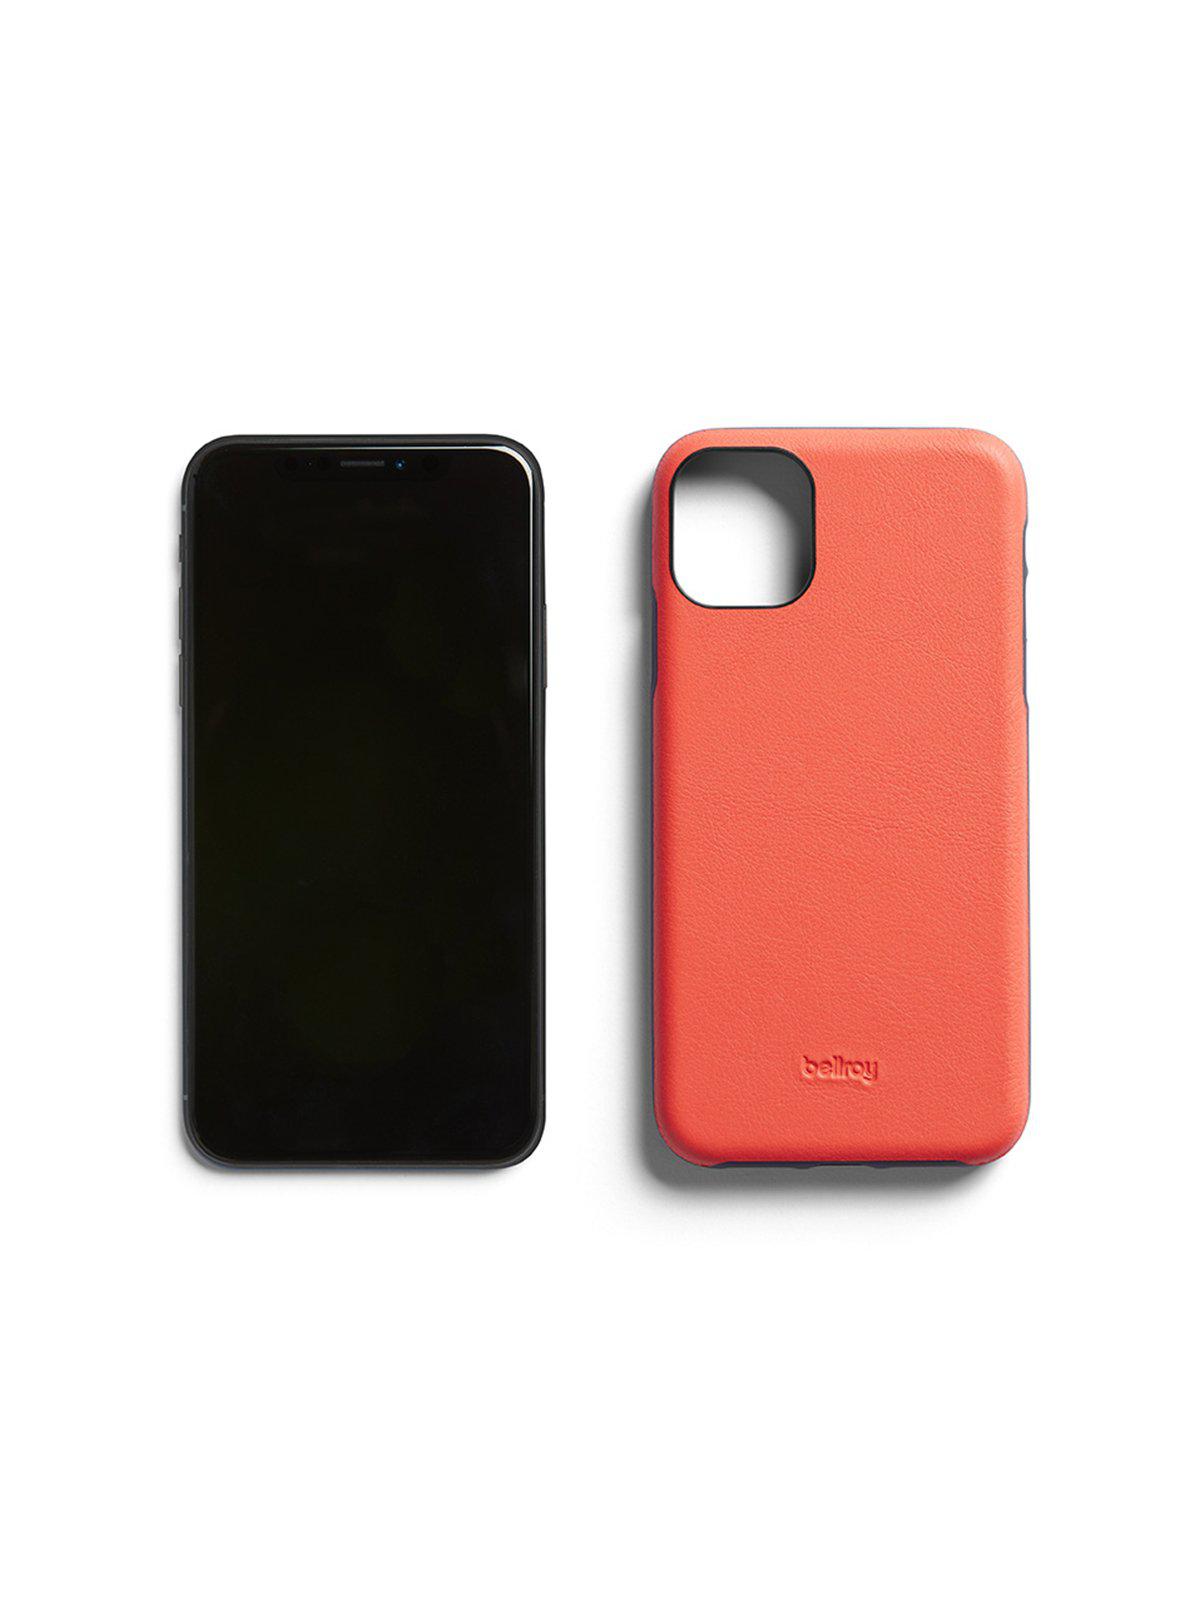 Bellroy Leather Phone Case for iPhone 11 Pro Coral - MORE by Morello Indonesia